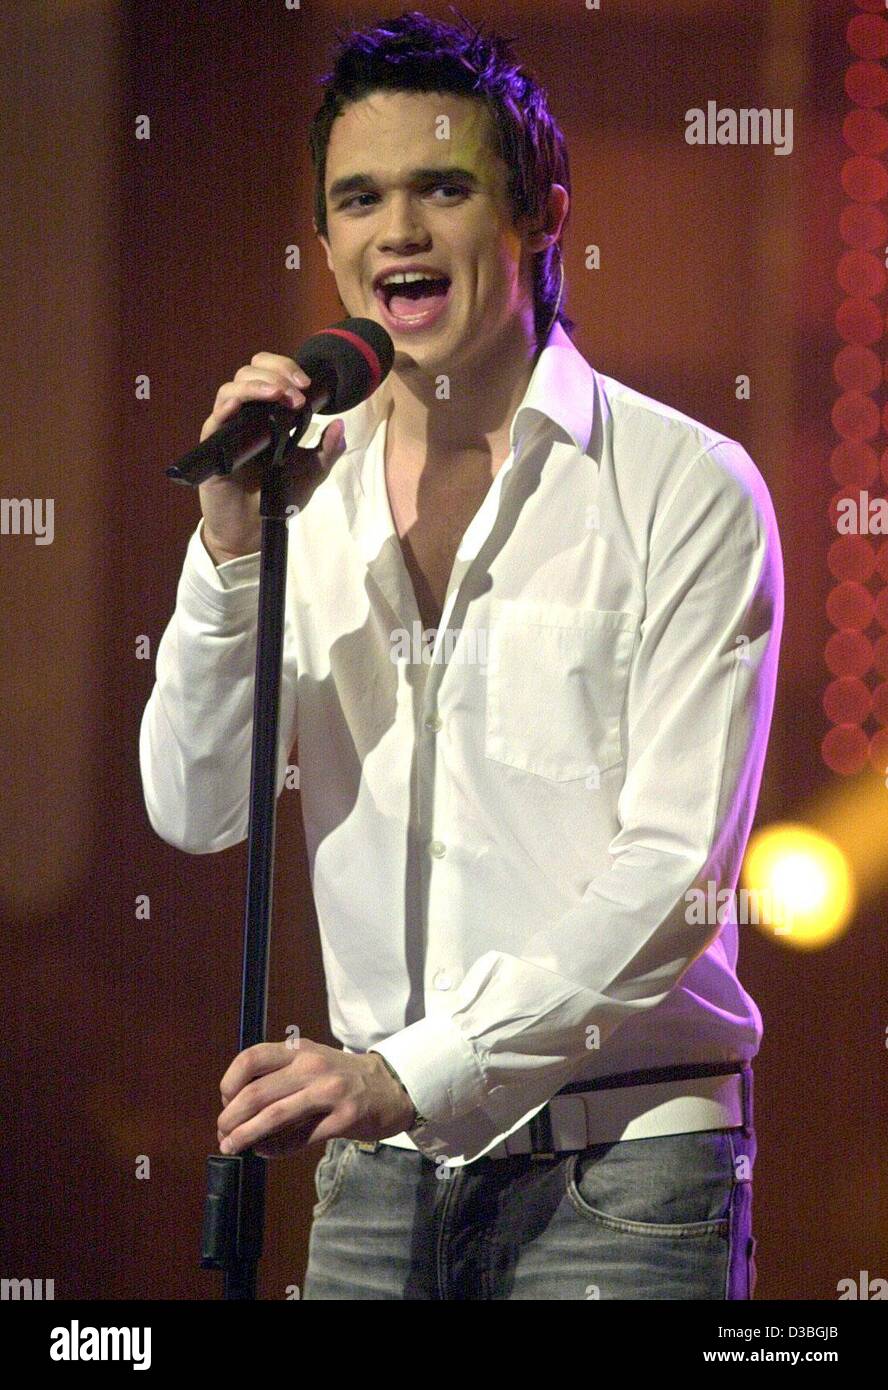 (dpa) - British pop singer Gareth Gates performs during a concert recorded for a TV show at the Europapark Rust, Germany, 22 May 2003. Gates came to fame when he won second place in the TV casting competition 'Pop Idol' in Britain, the equivalent of 'American Idol' and 'Deutschland sucht den Superst Stock Photo